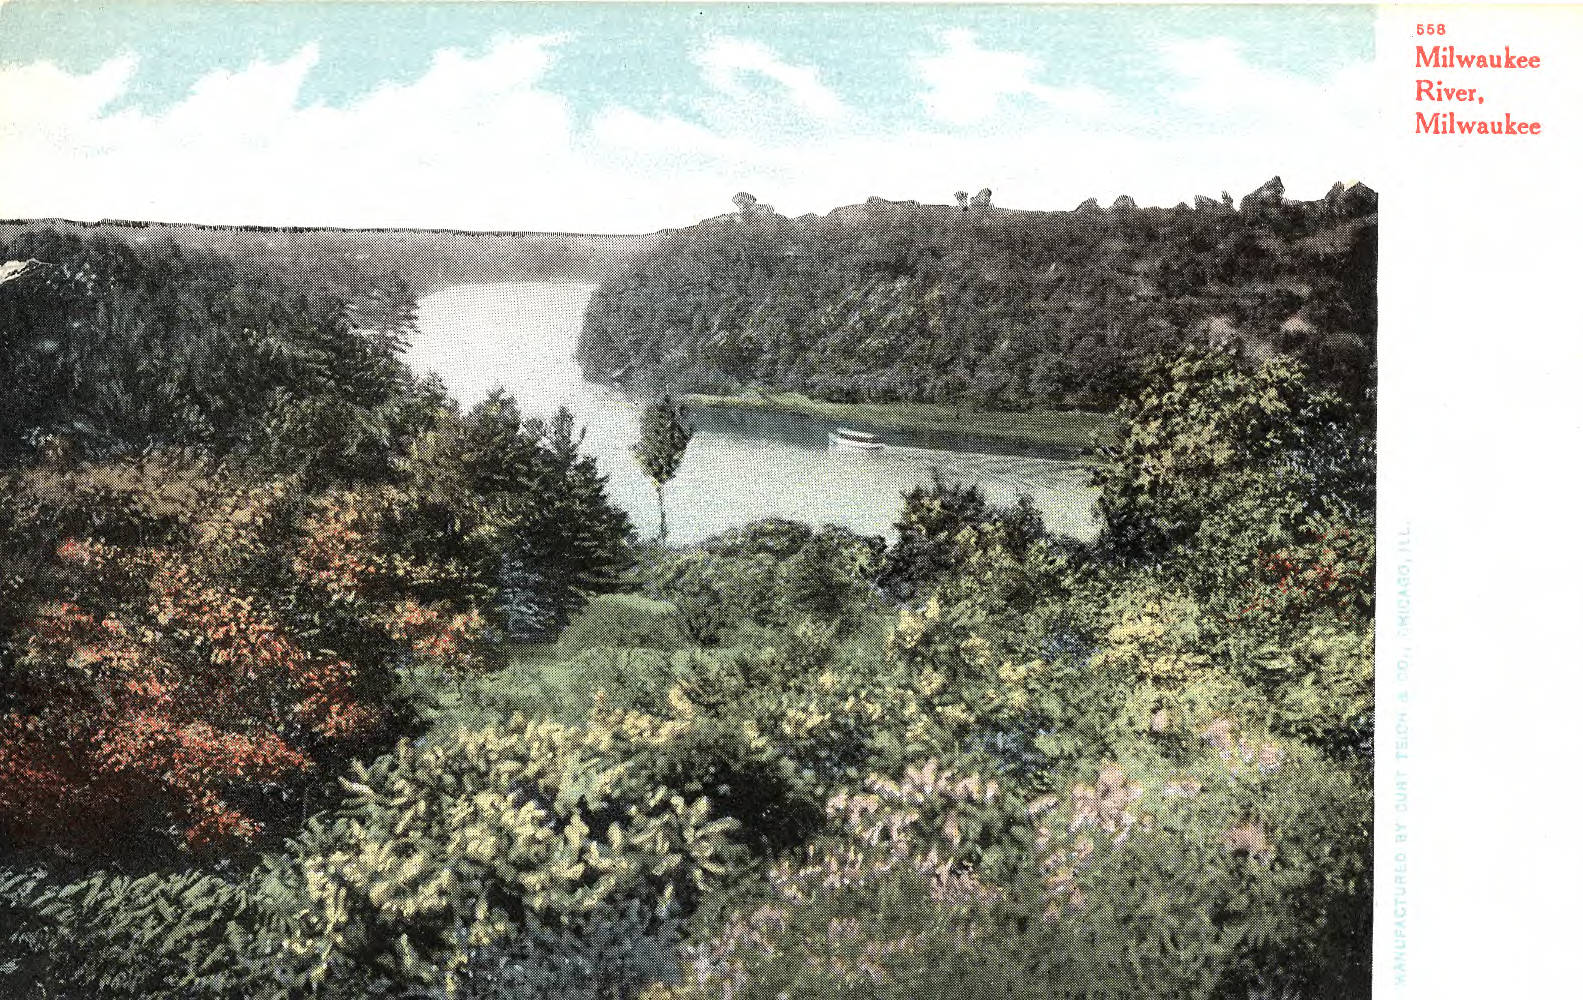 By the early twentieth century, nearly all of the natural woodlands in Milwaukee, as seen here flanking the Milwaukee River, were gone. 